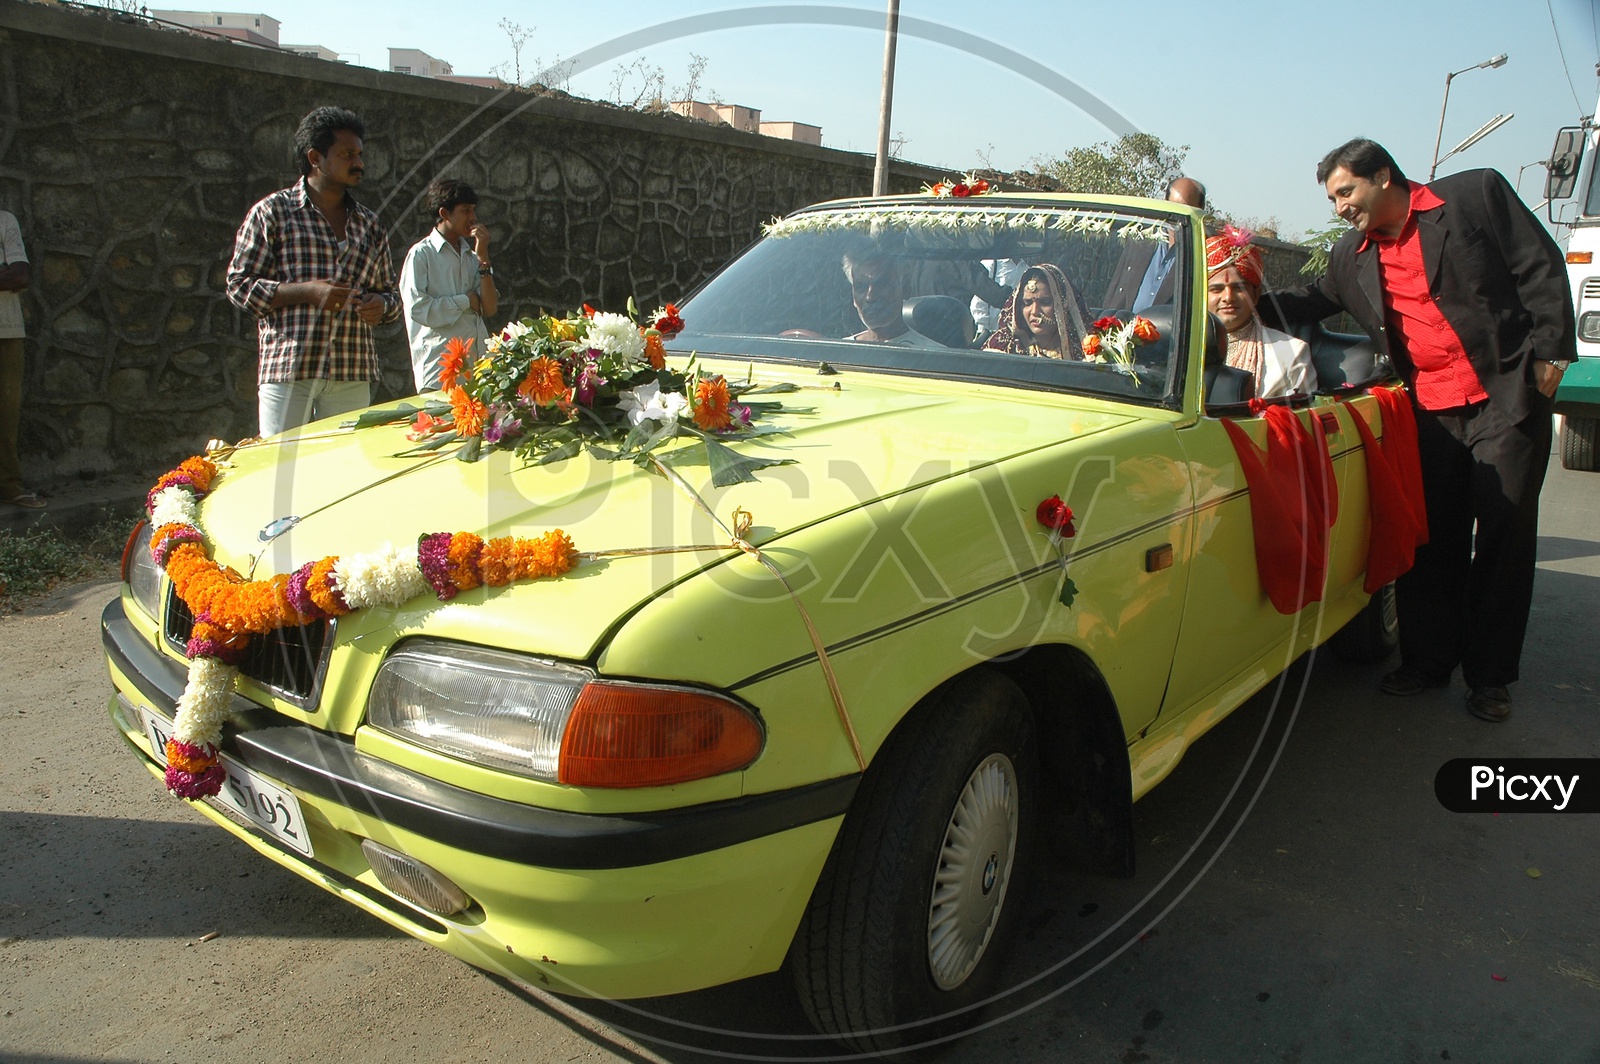 Wedding Car Decorated With Flowers